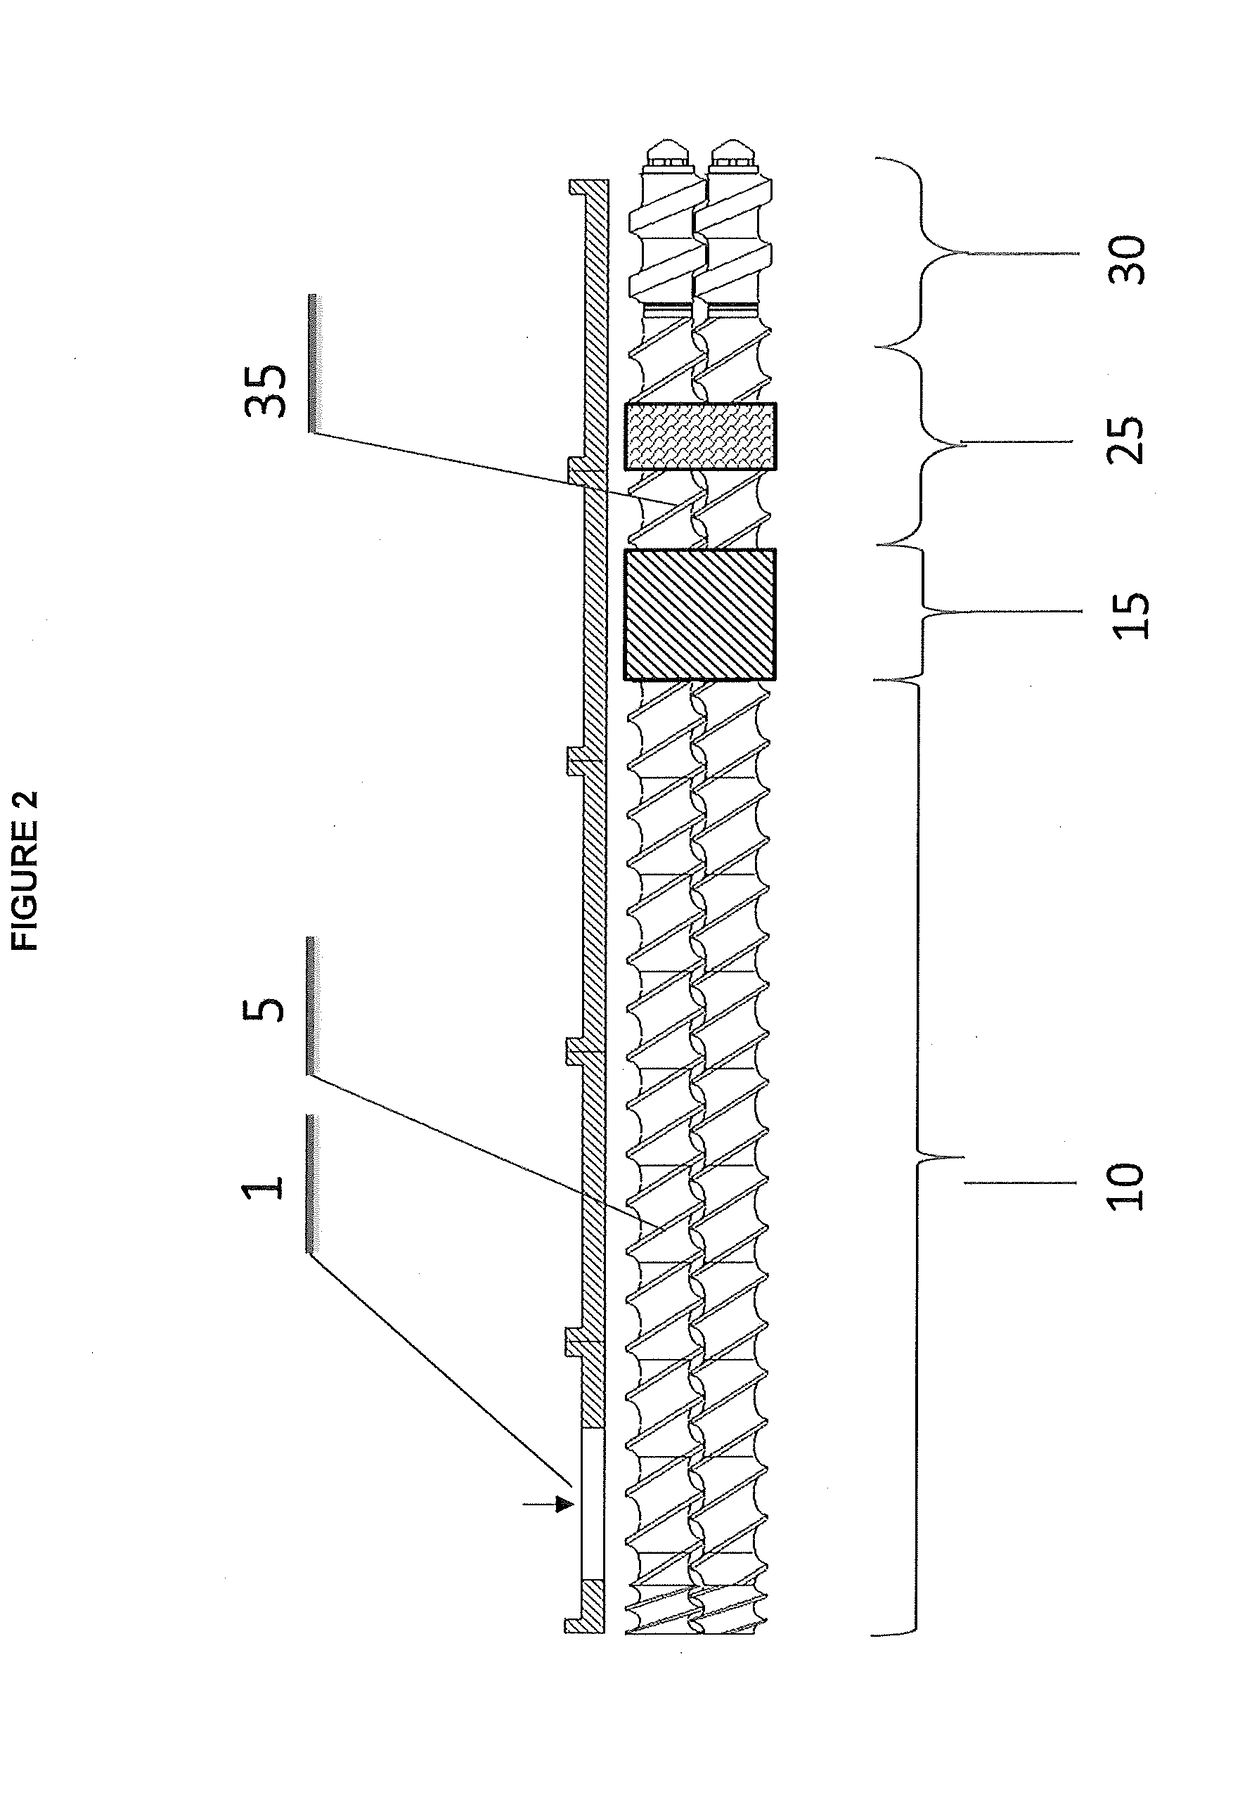 Extrusion process for polyethylene polymers